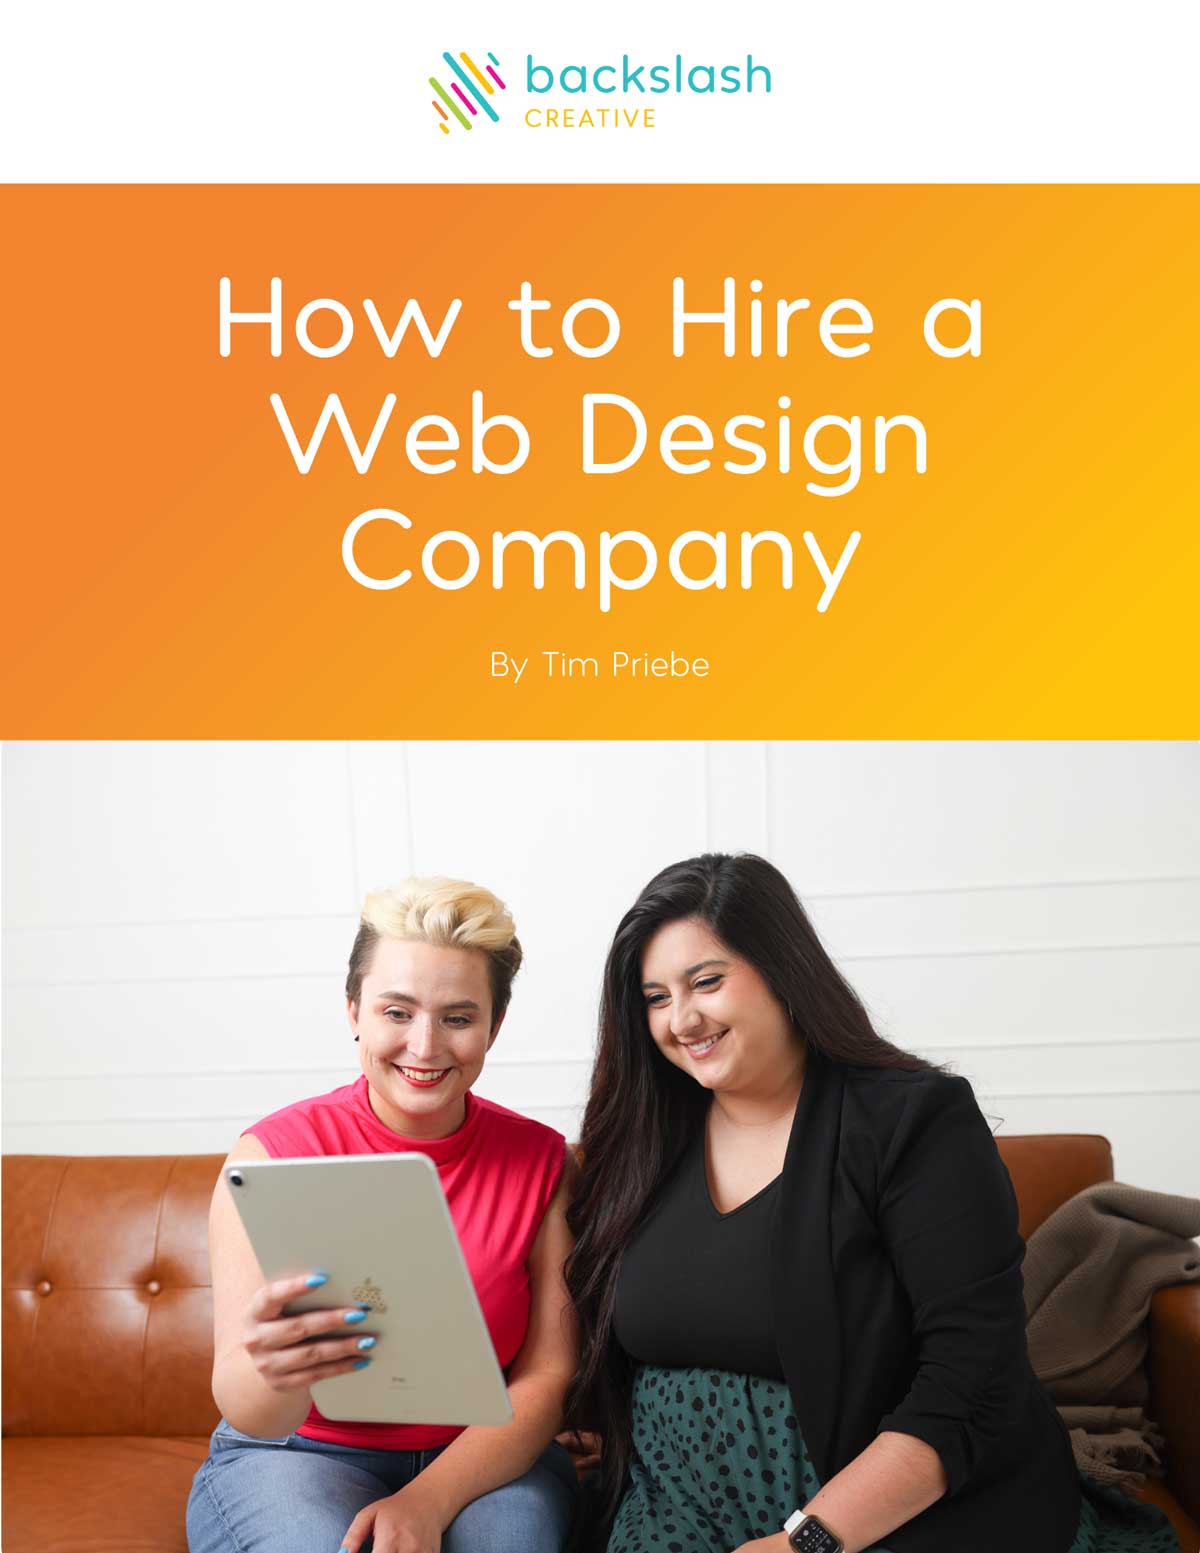 How to Hire a Web Design Company